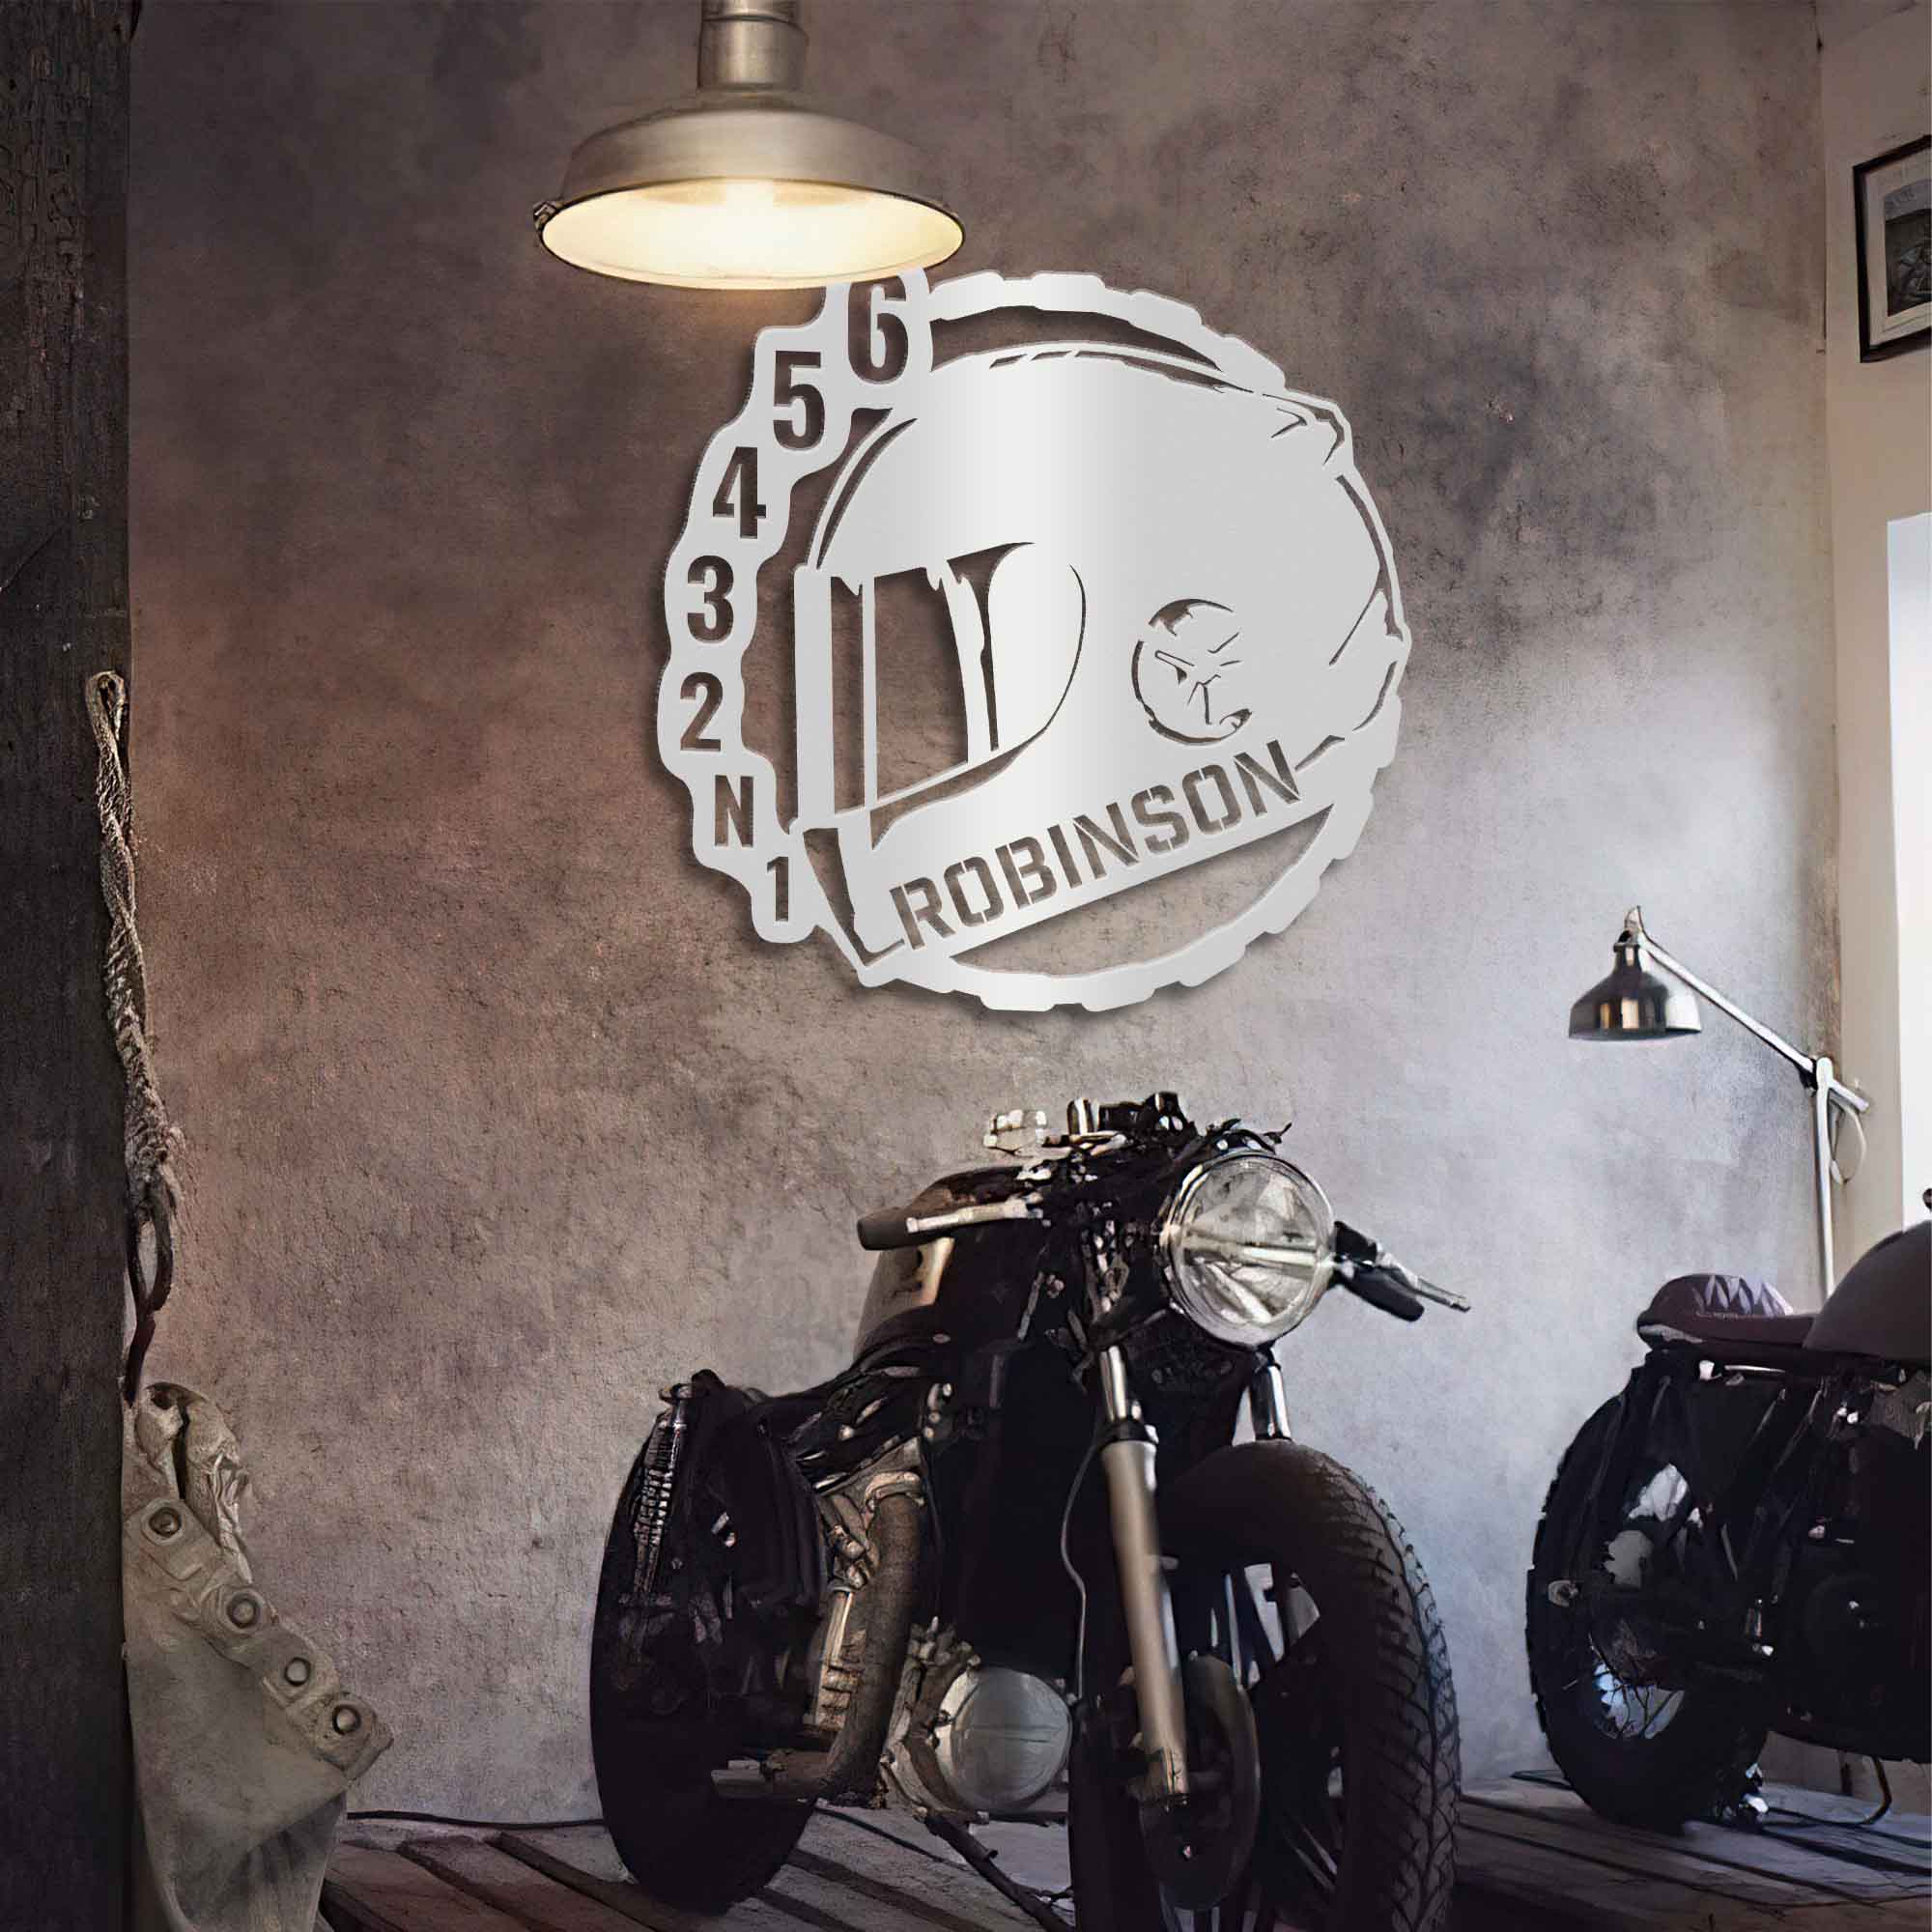 Full Face Helmet With Gearing - Personalized Metal Wall Art - 0075 Metal Art - Throttle Mania